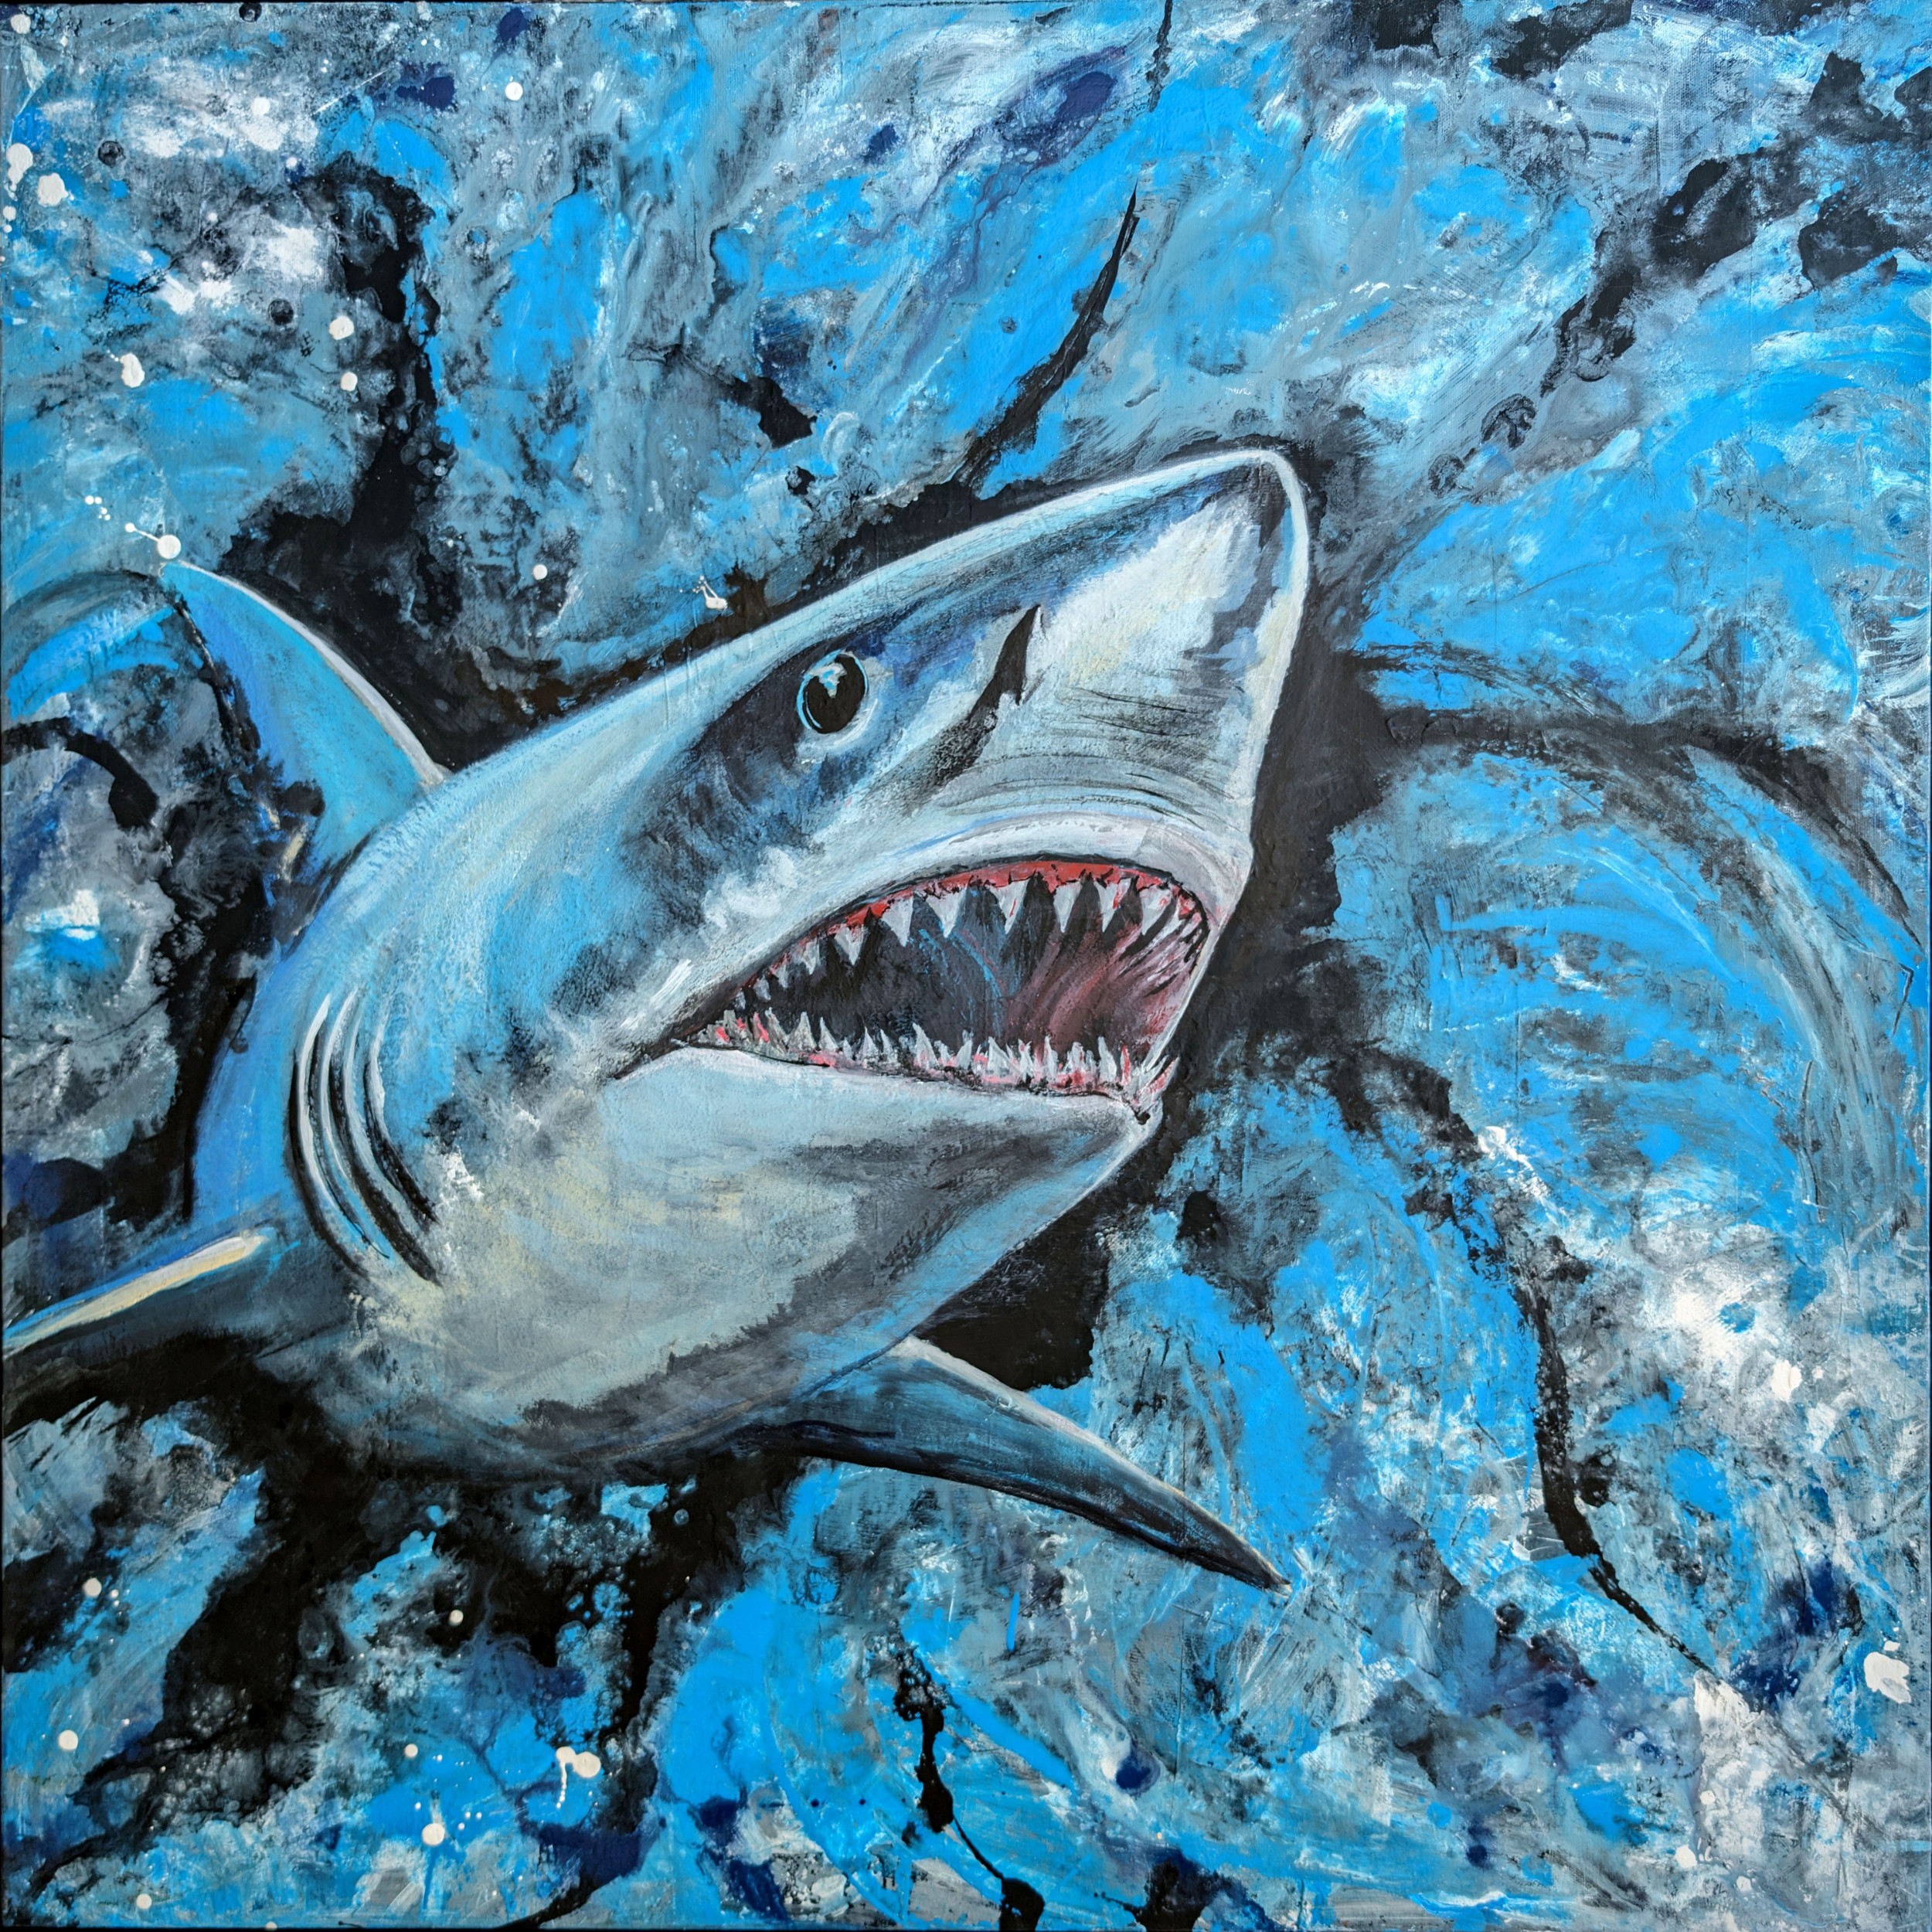 Shark Painting - Contact Gordo for price